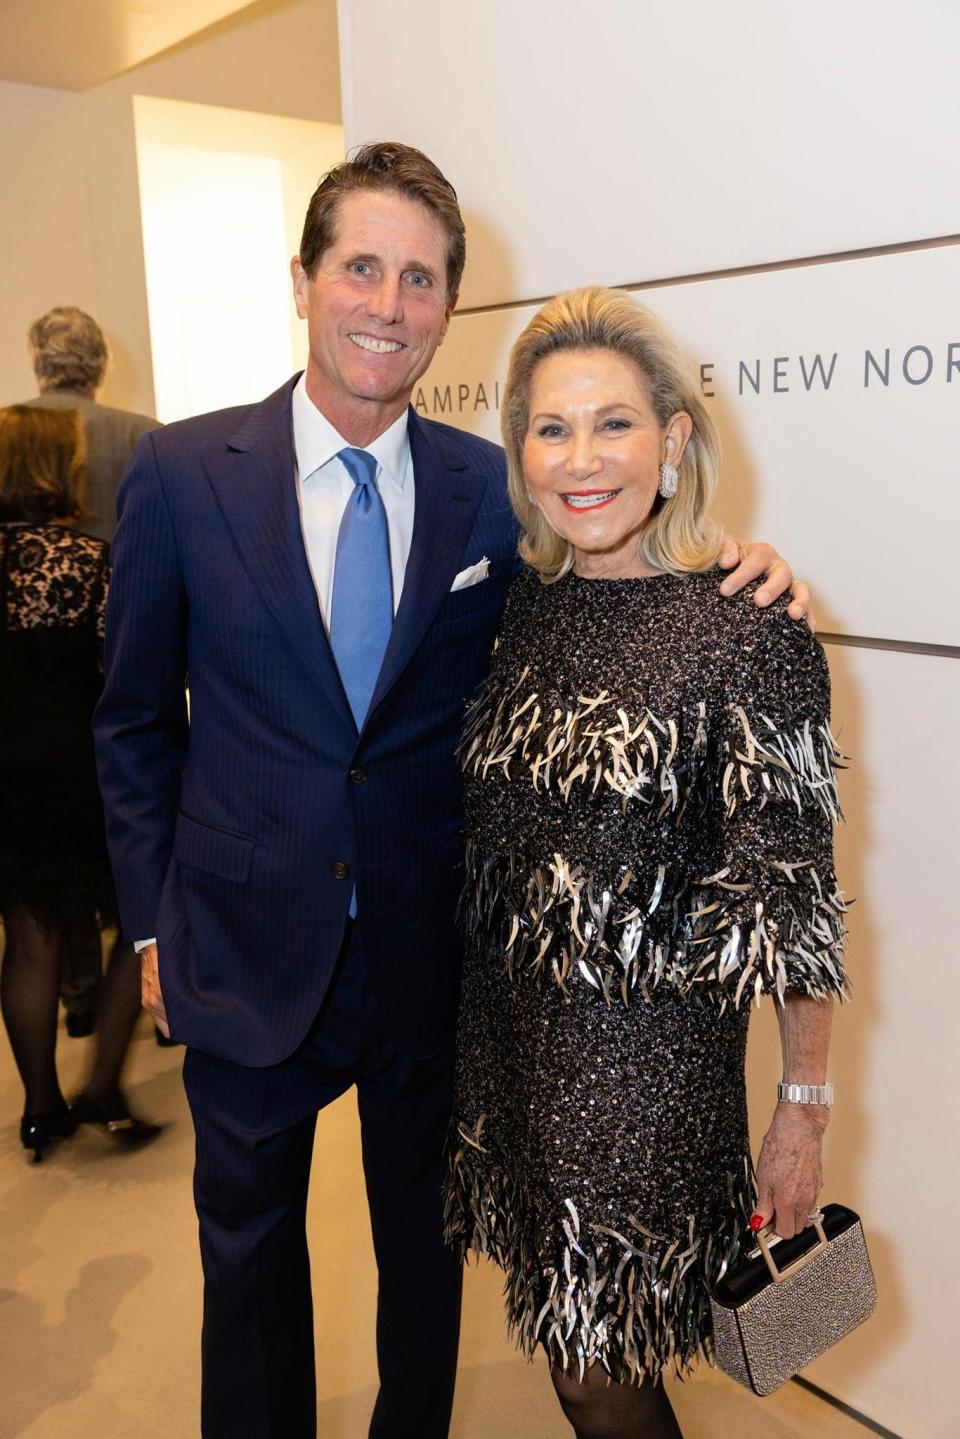 Bruce Gendelman and Ronnie Heyman at the Norton Museum gala.